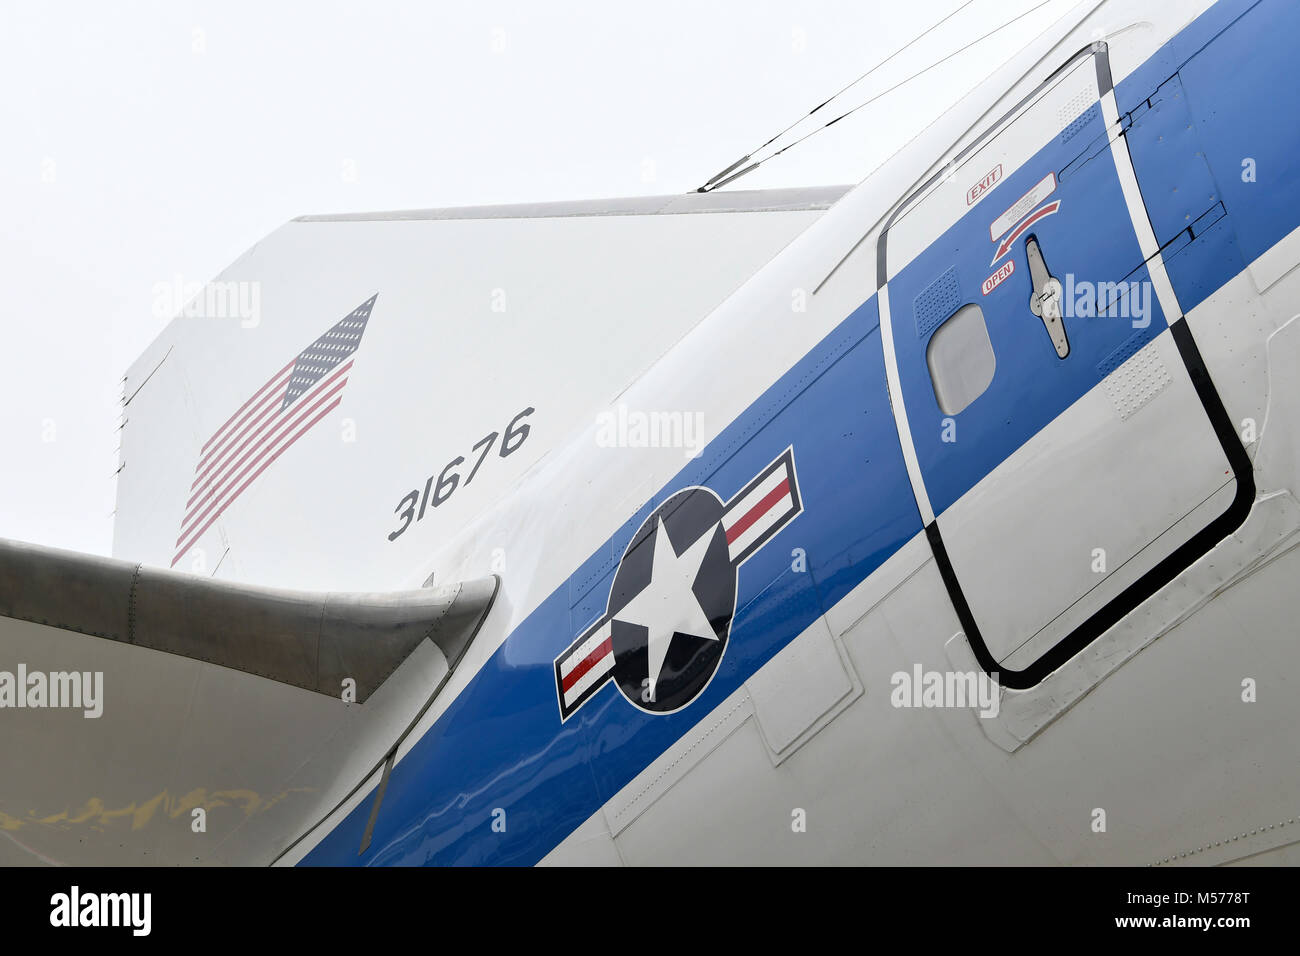 fin, rudder, wing, flap, detail, USA, USAF, United States of America, Boeing, B747, B4-E, Air Force, Munich Security Conference, Airport, Munich, MUC Stock Photo